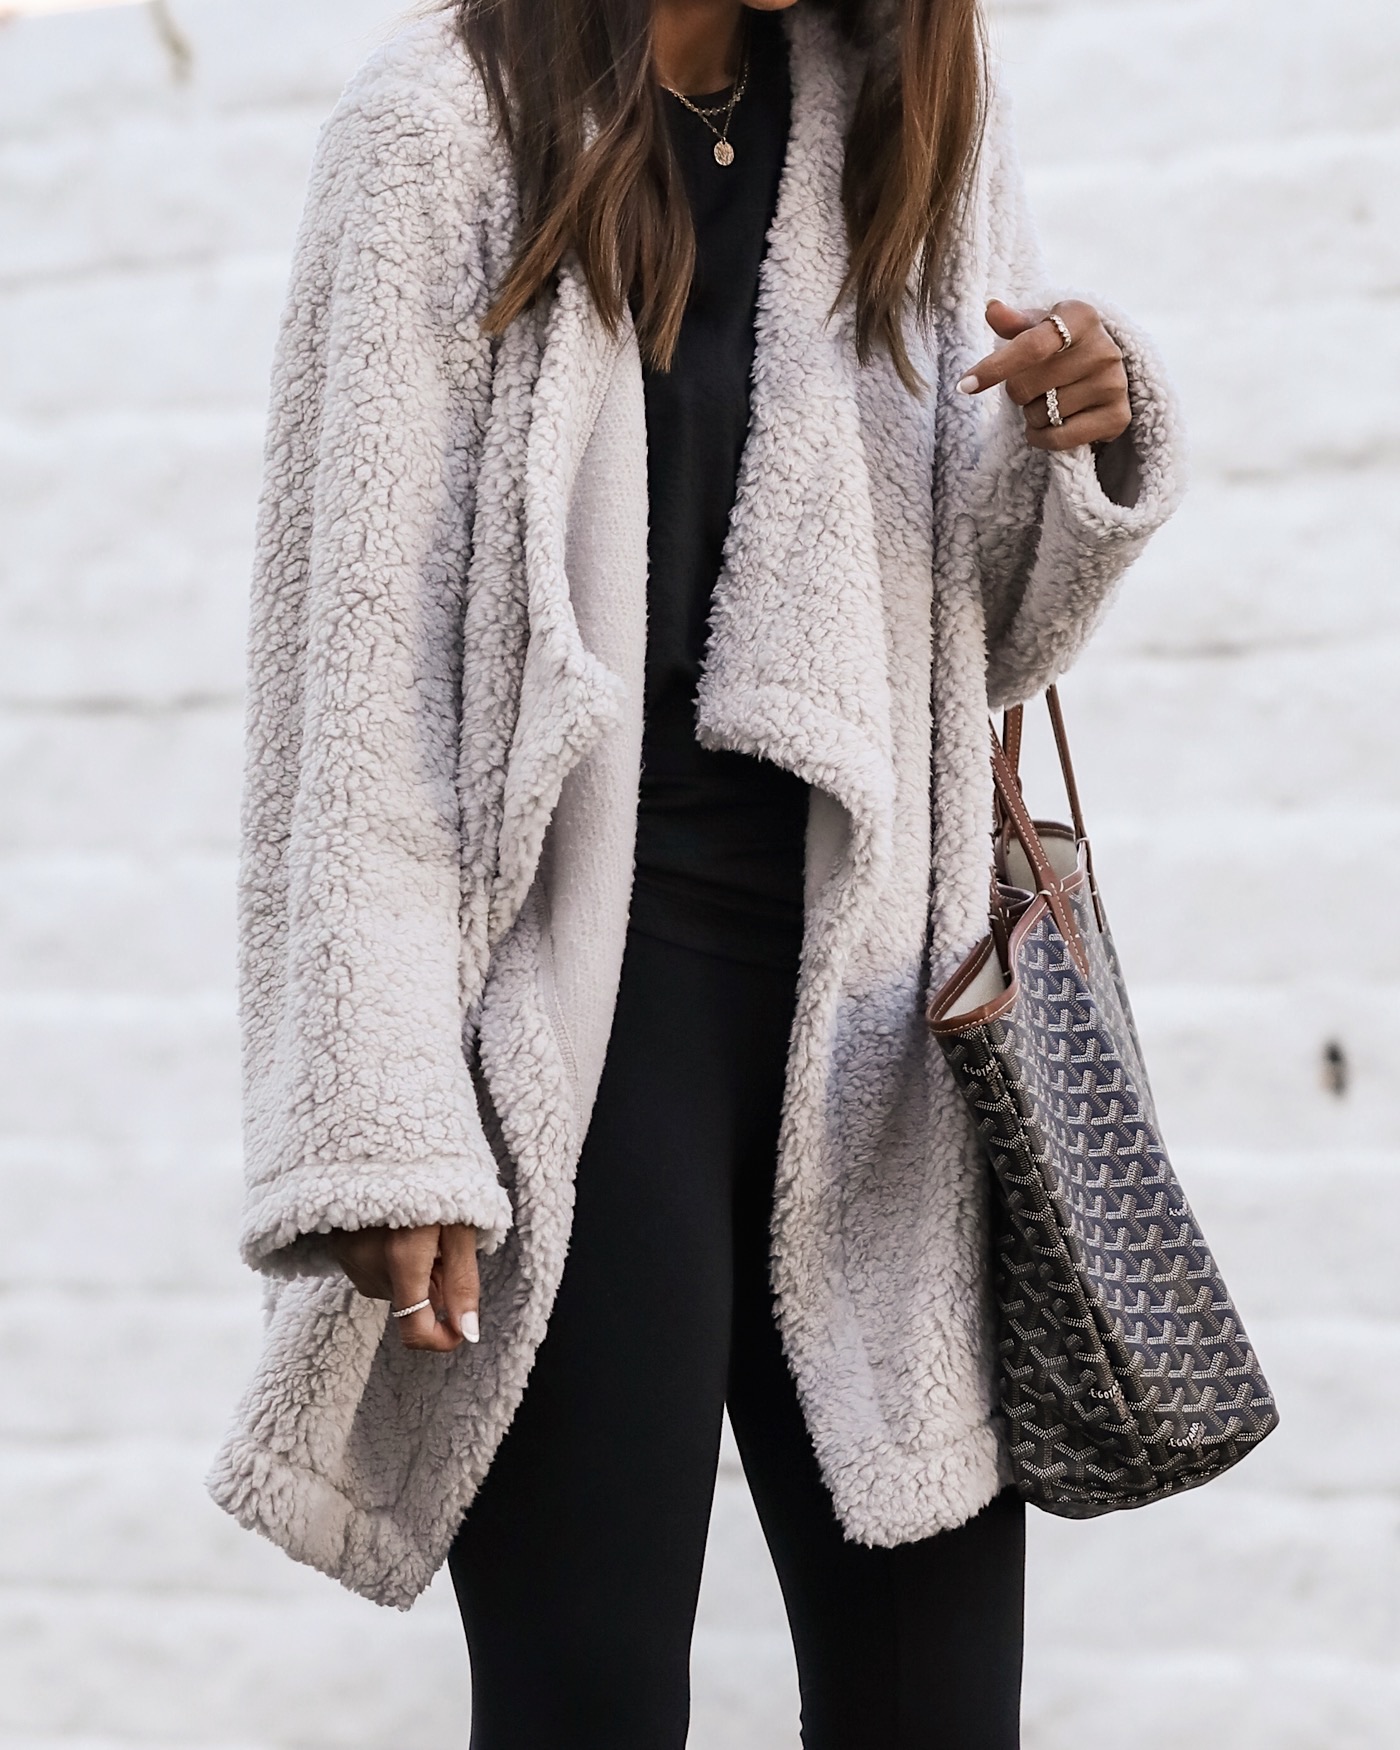 GET COZY FOR THE HOLIDAYS - Stylin by Aylin